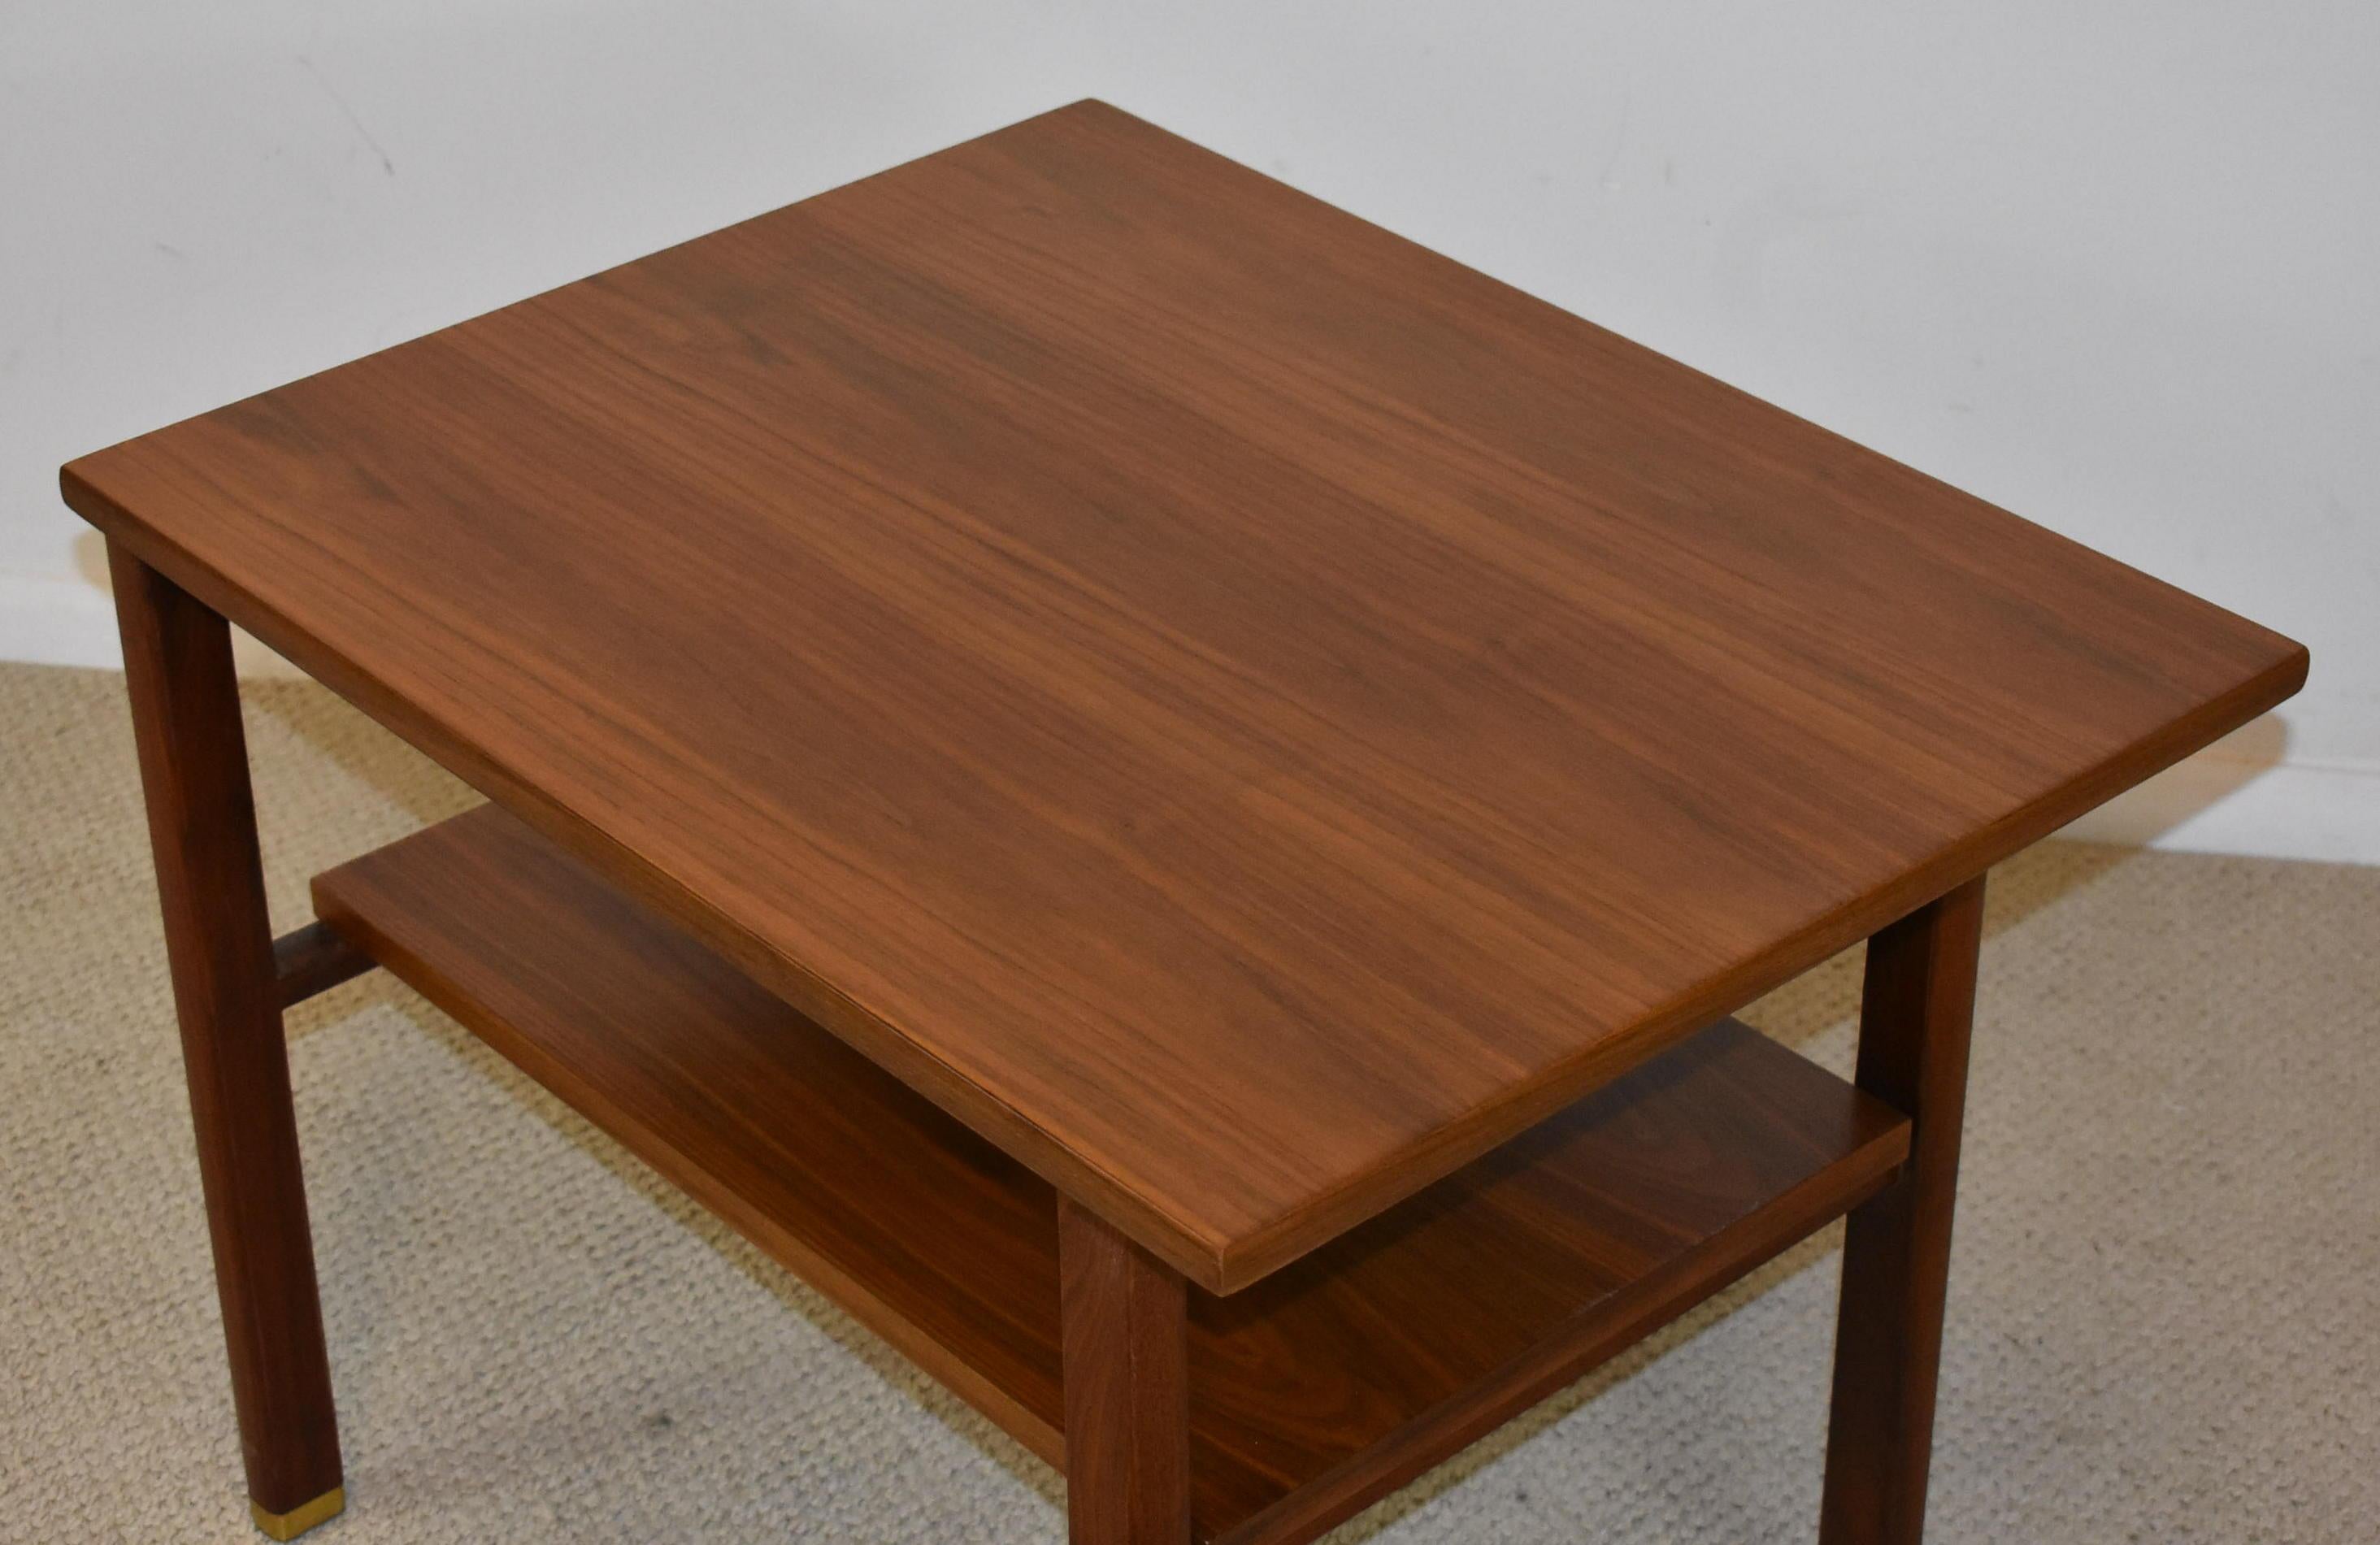 Mid-Century Modern Two-Tiered Walnut Cantilever Top Table Designed by Edward Wormley for Dunbar